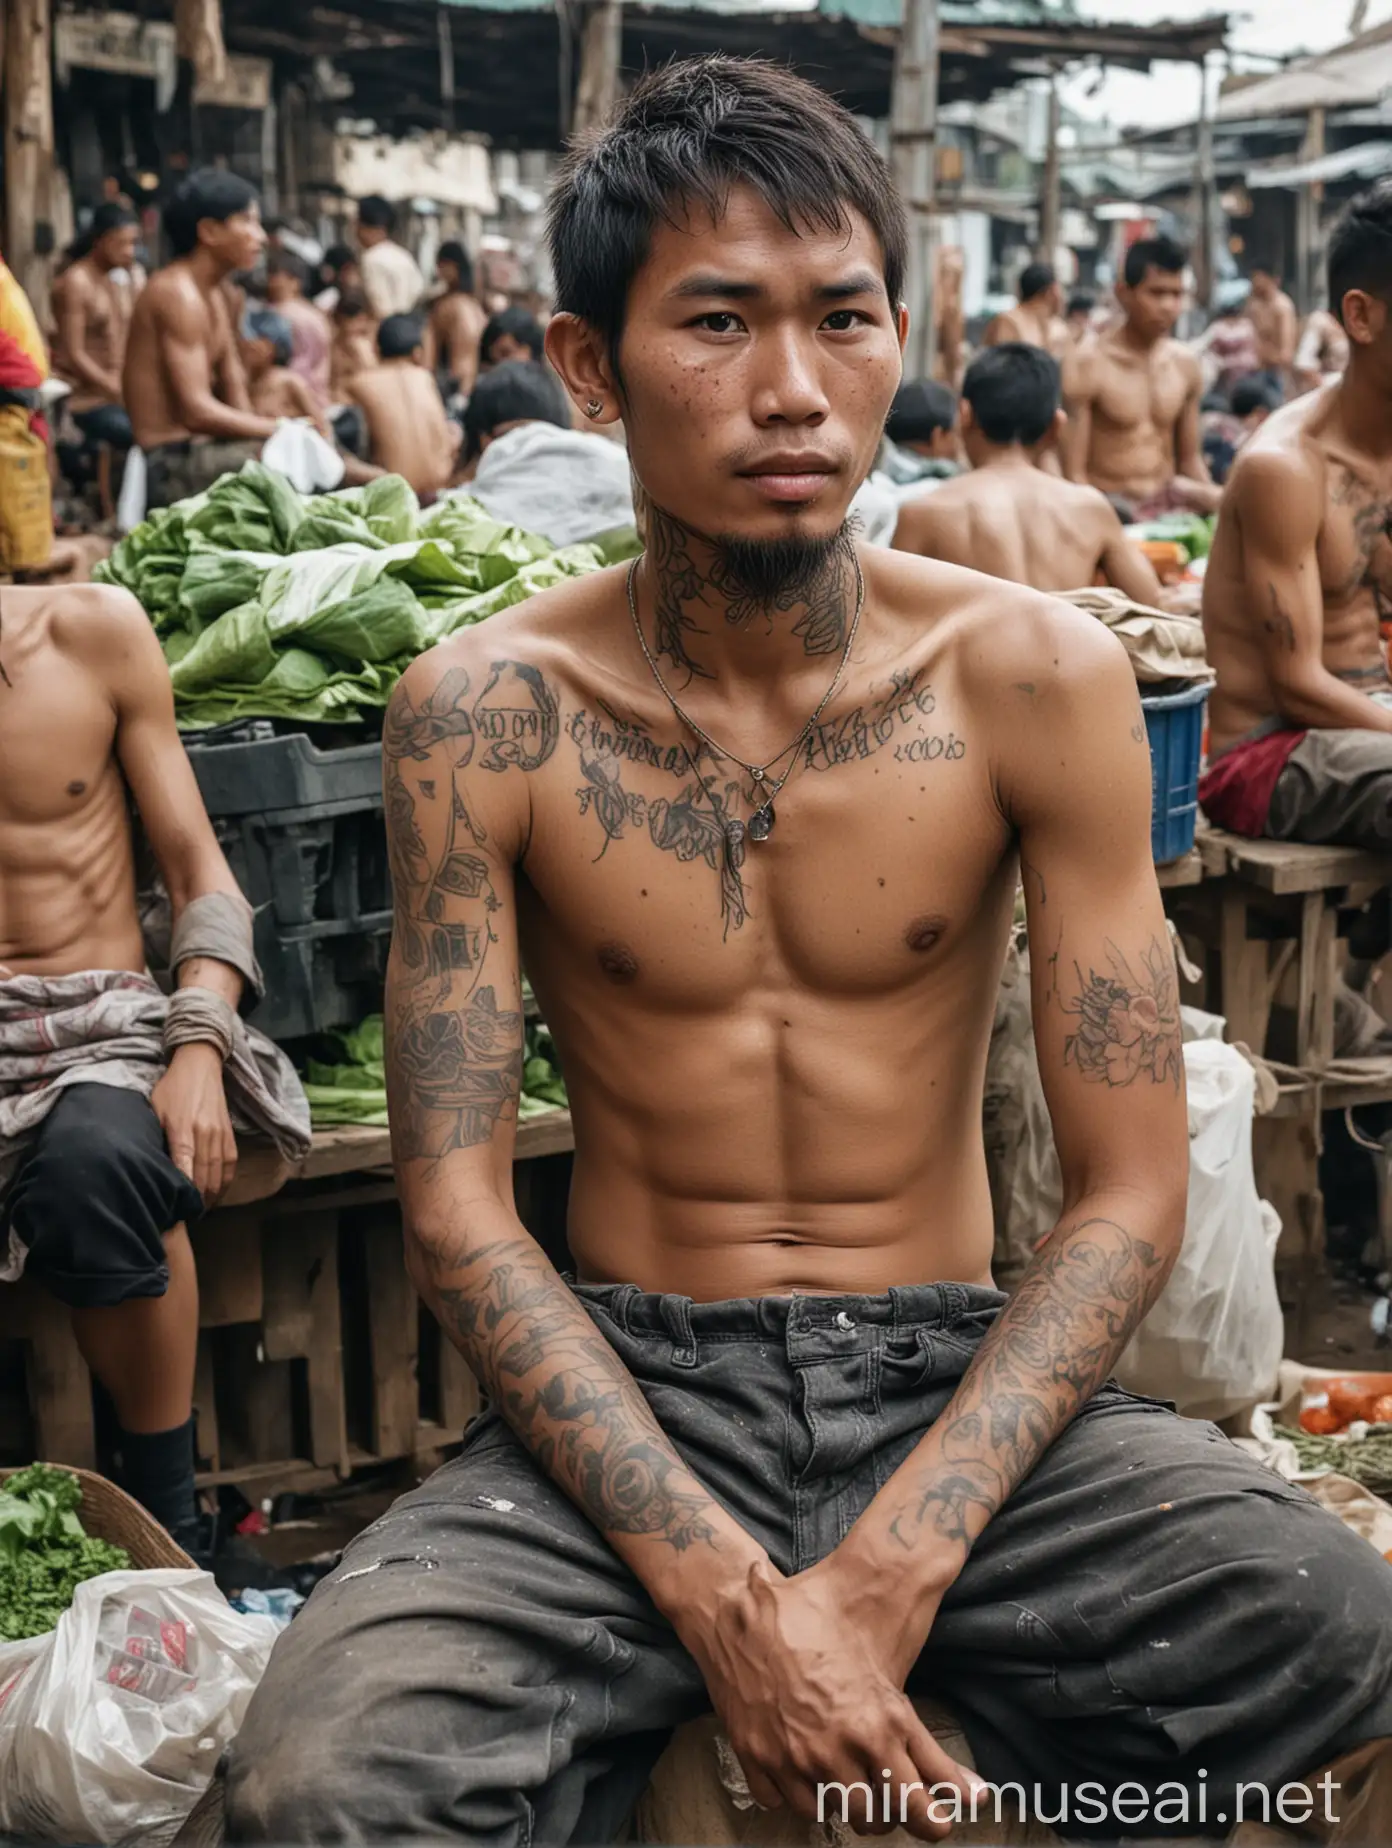 A 20-year Indonesian young man with a tattoo and hairy abs shirtless wearing shabby and worn-out clothes on his neck, is sitting in a dirty market in Indonesia, with many crowds of people, mothers carrying plastic bags of vegetables behind him.